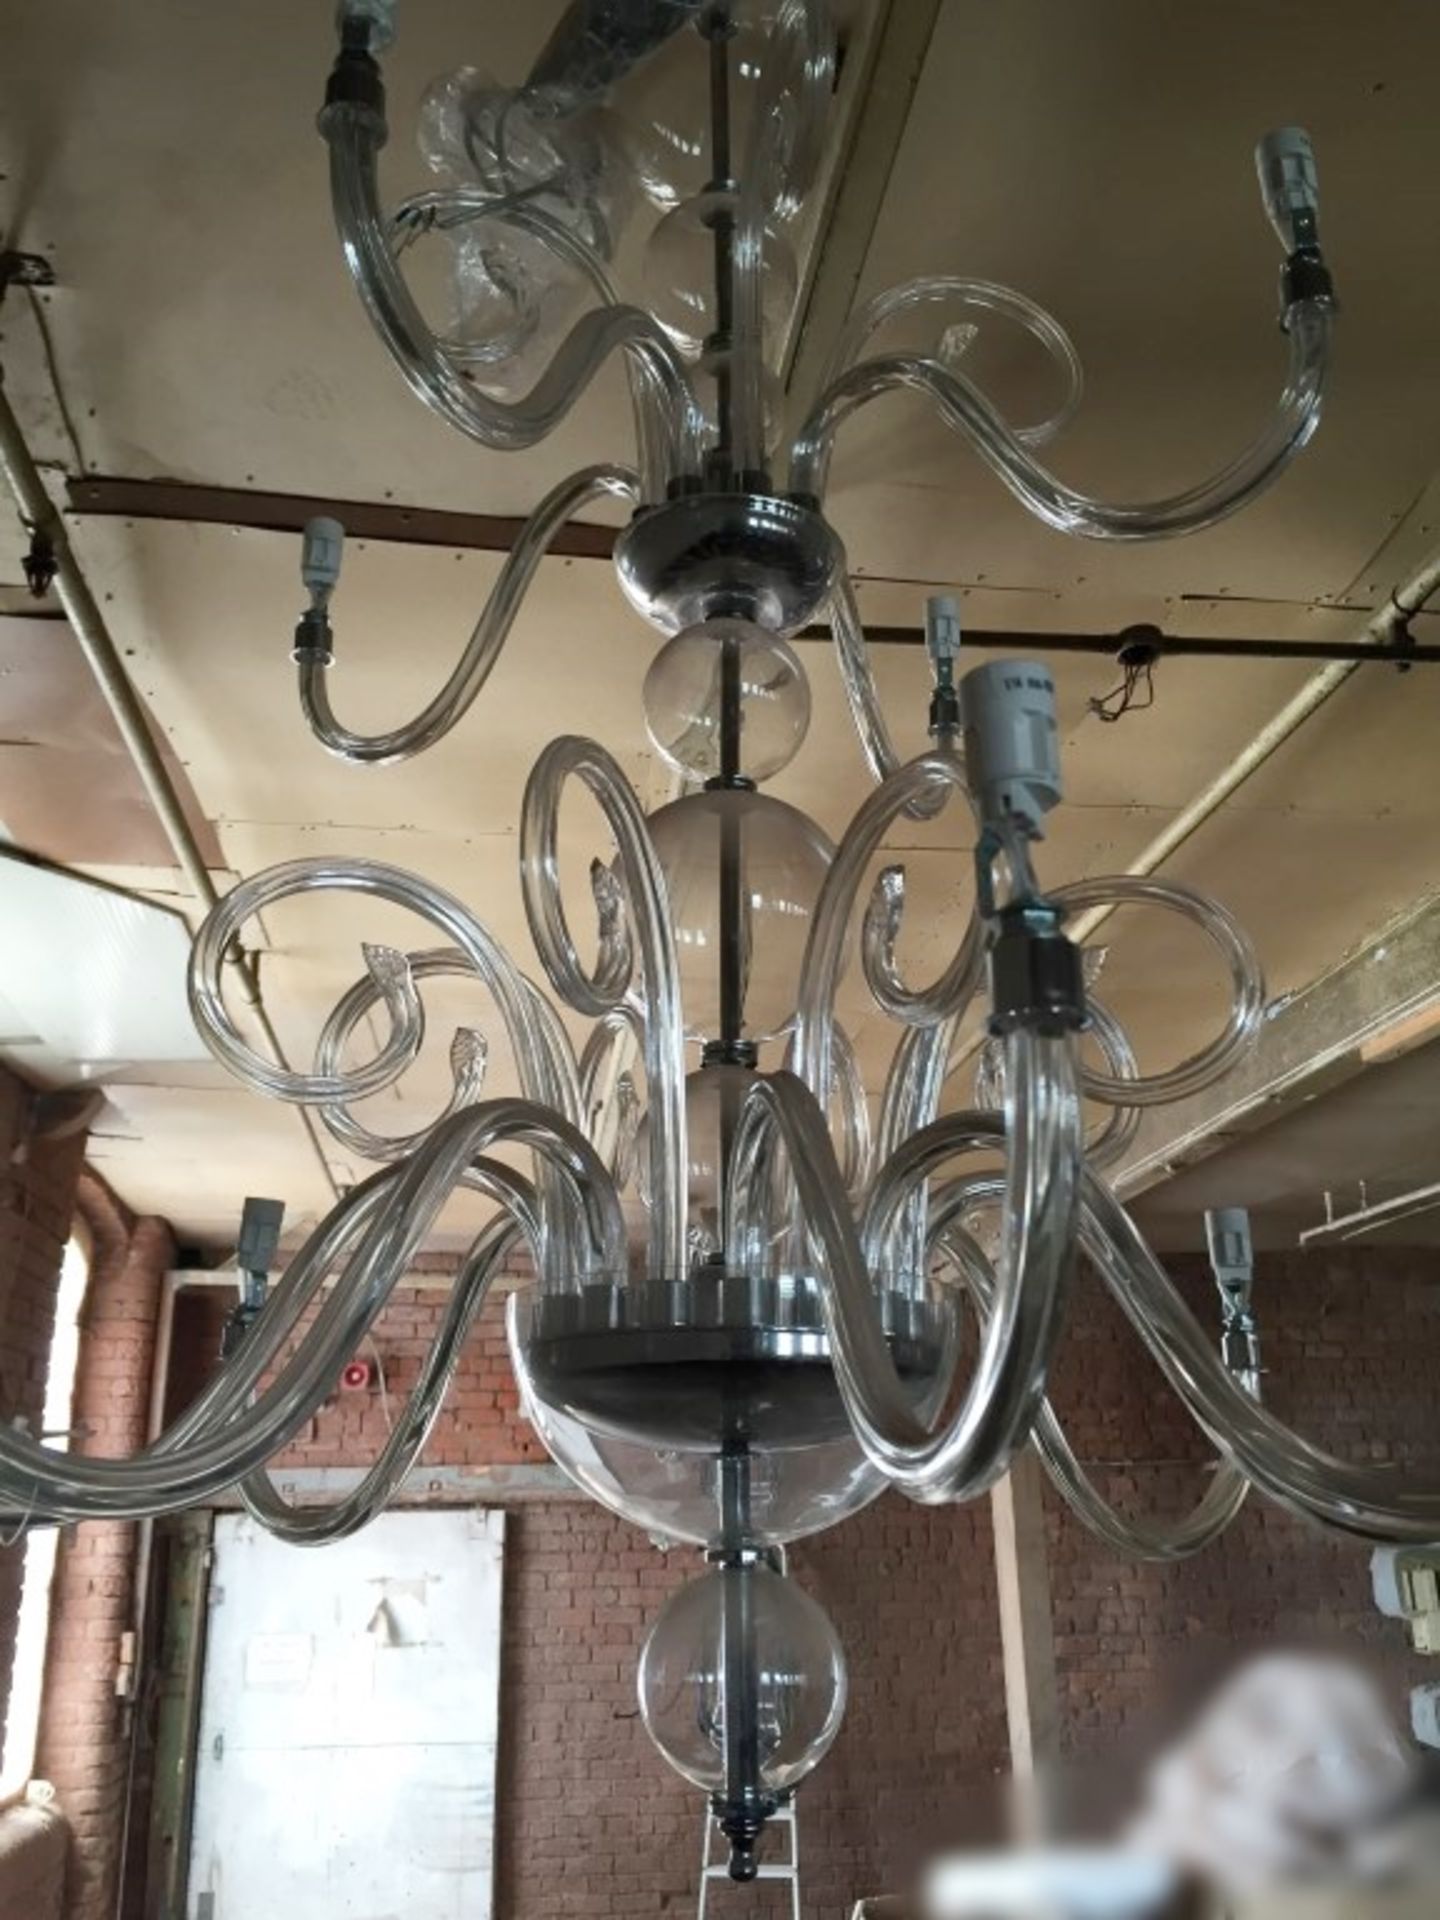 1 x Large, Ornate Chandelier-style Light Fitting - Dimensions To Follow - Ref: NDE083 - CL122 - - Image 2 of 8